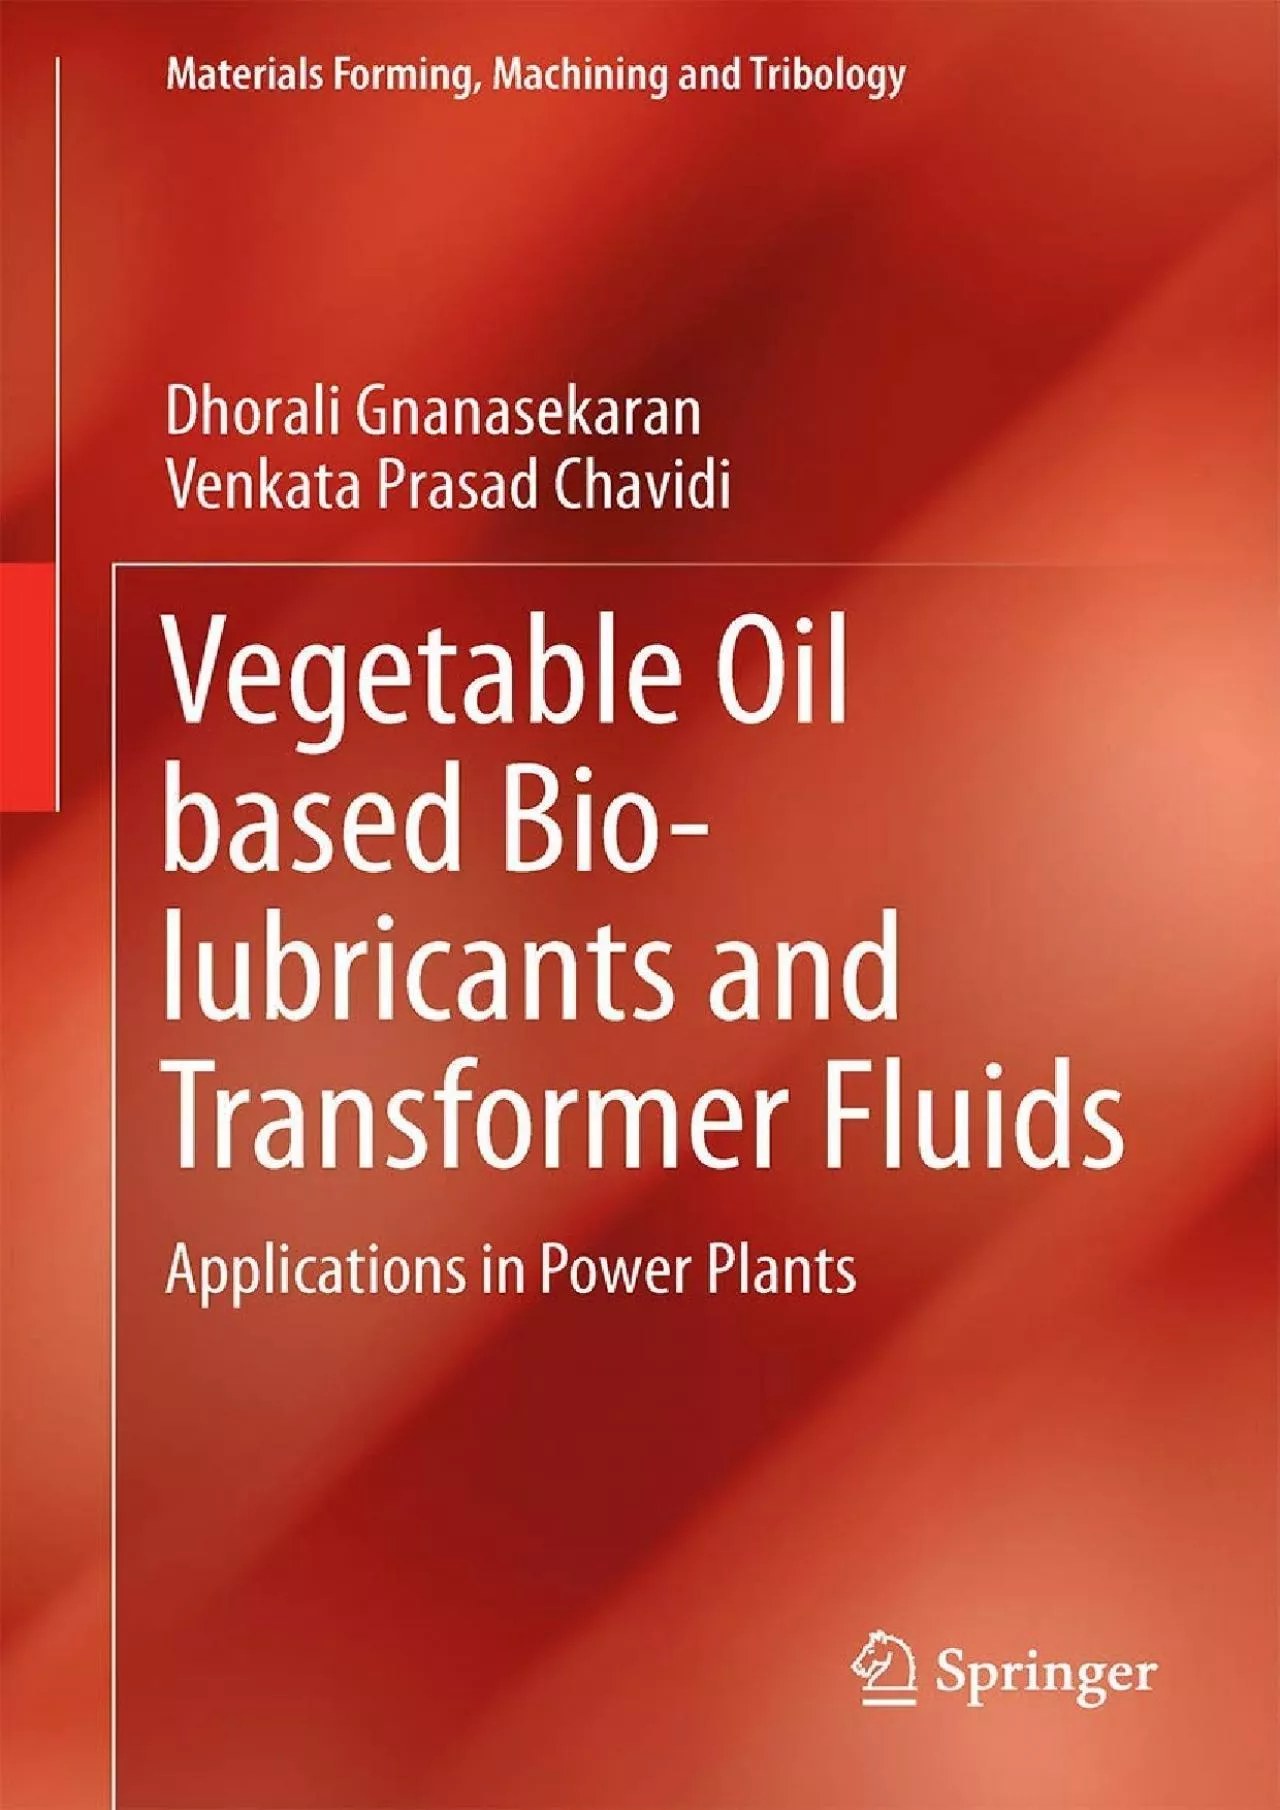 (BOOS)-Vegetable Oil based Bio-lubricants and Transformer Fluids: Applications in Power